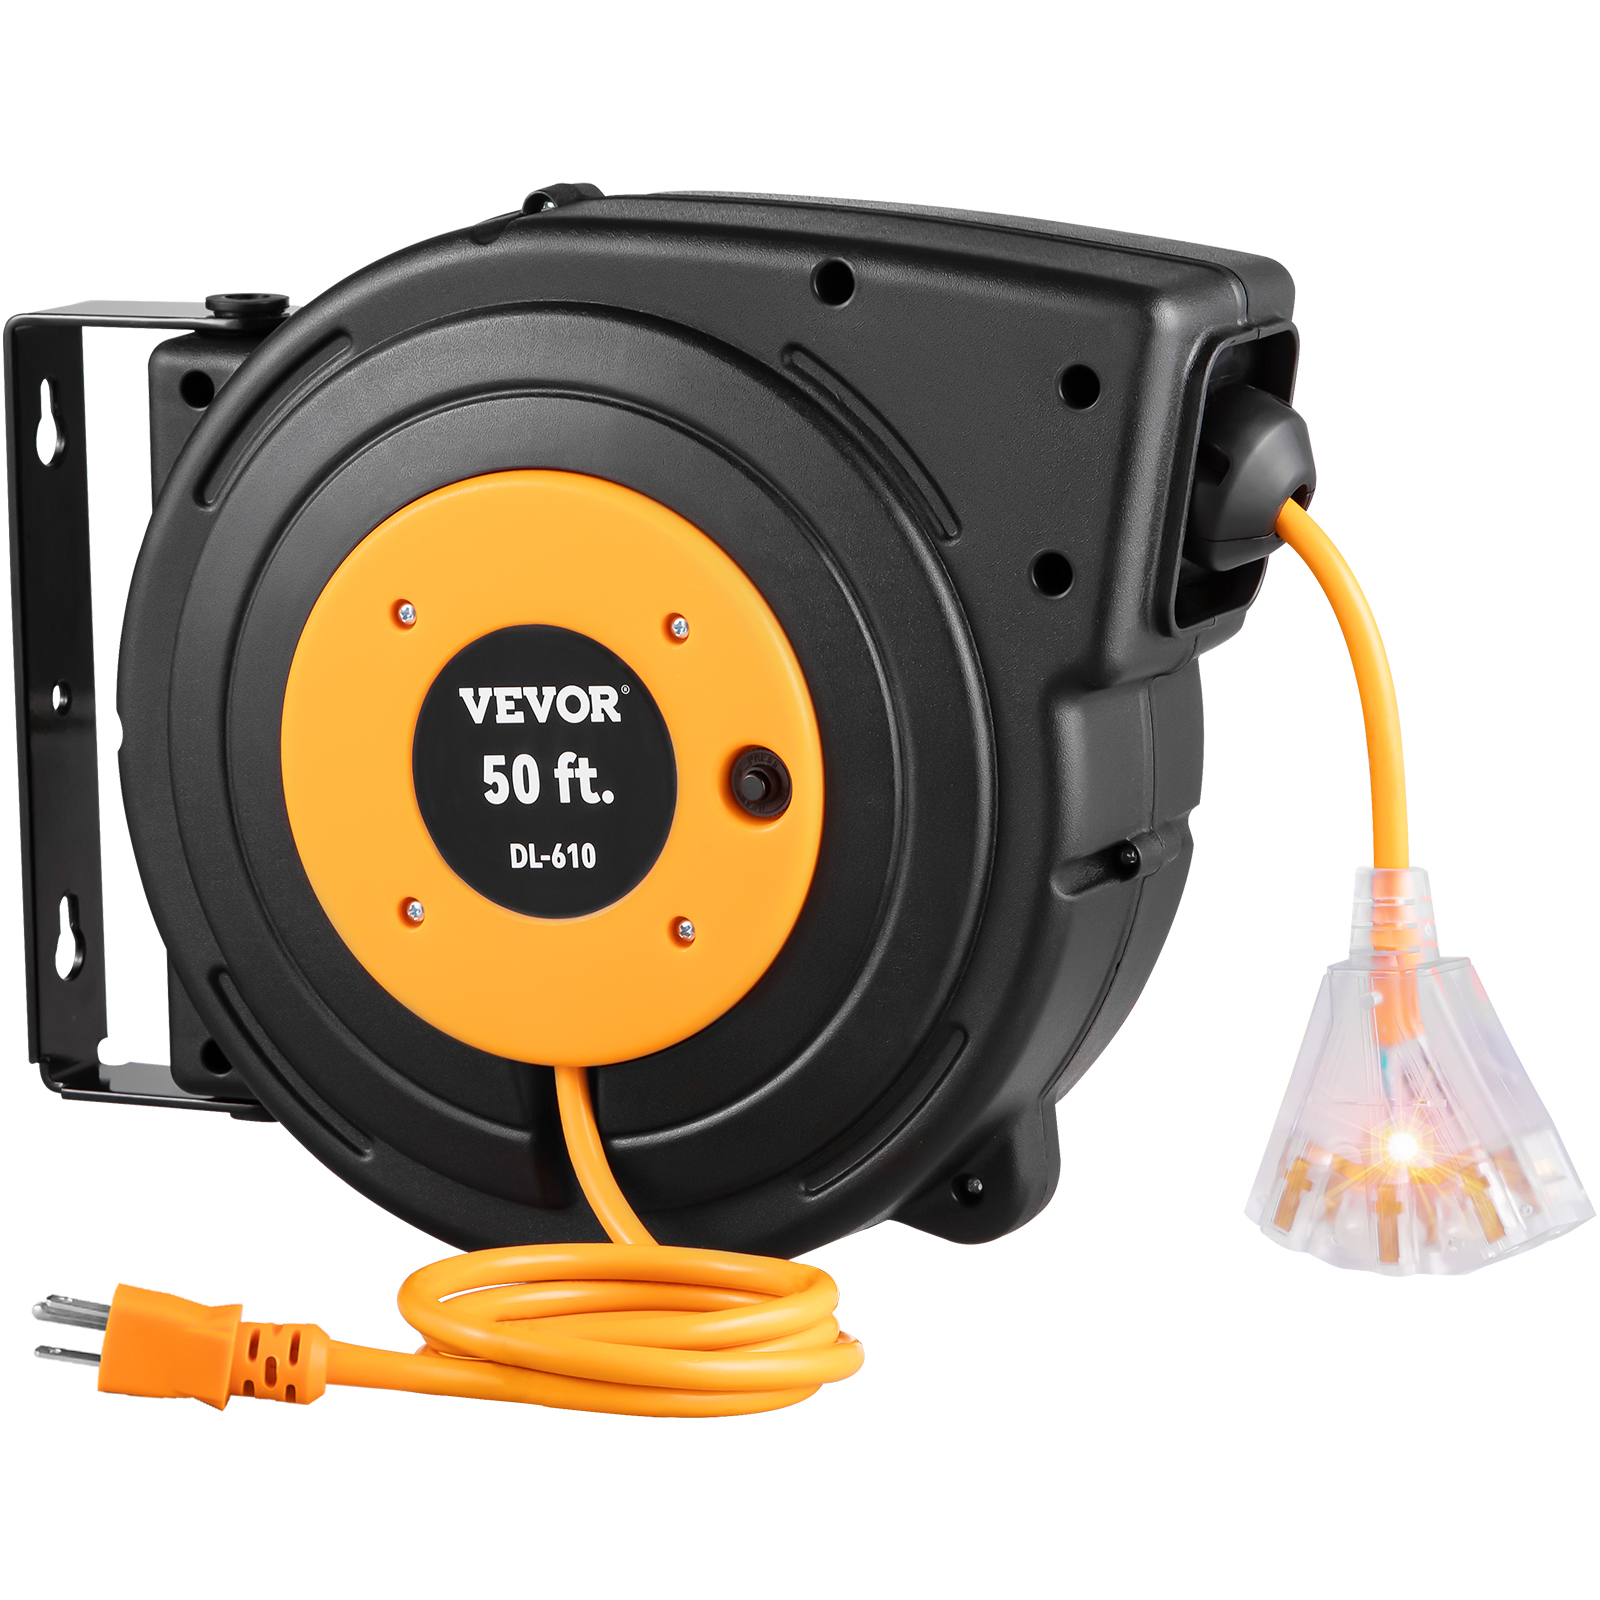 VEVOR Retractable Extension Cord Reel 50 ft Heavy Duty 14AWG/3C Sjtow Power Cord with Lighted Triple Tap Outlet, 13 Amp Circuit Breaker 180° Swivel